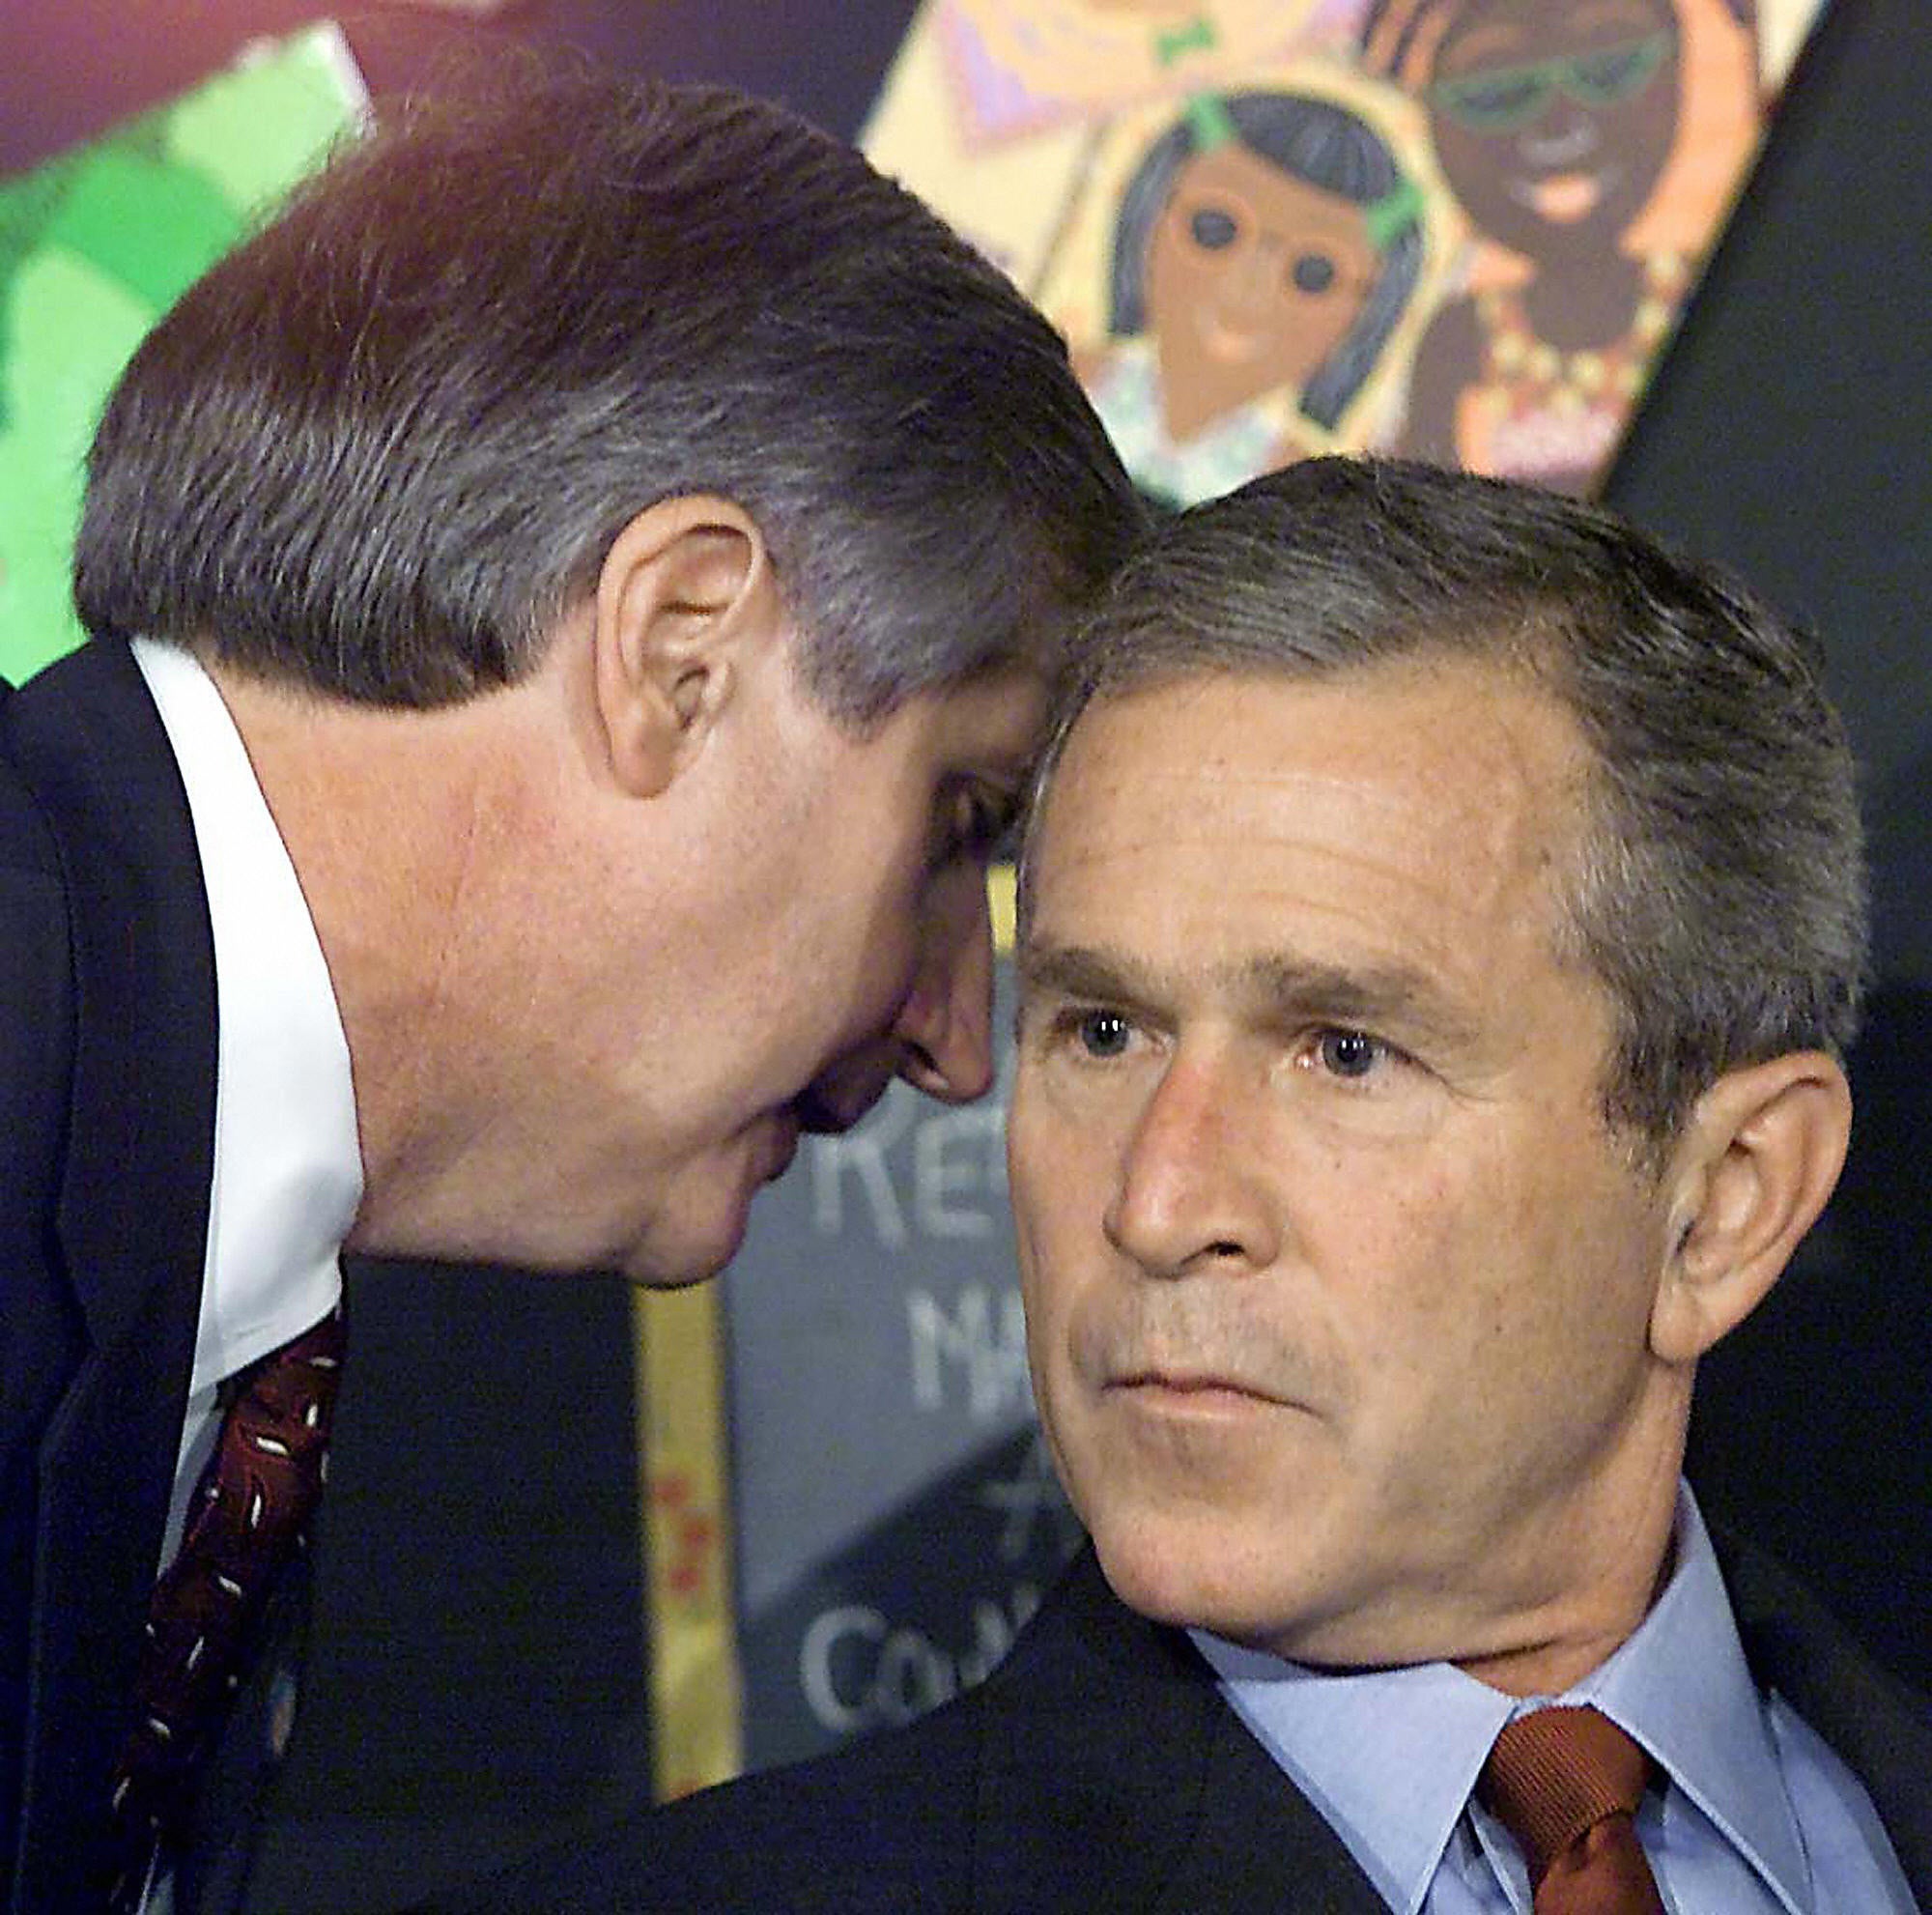 George W Bush receives news of a second attack on New York’s Twin Towers on September 11, 2001